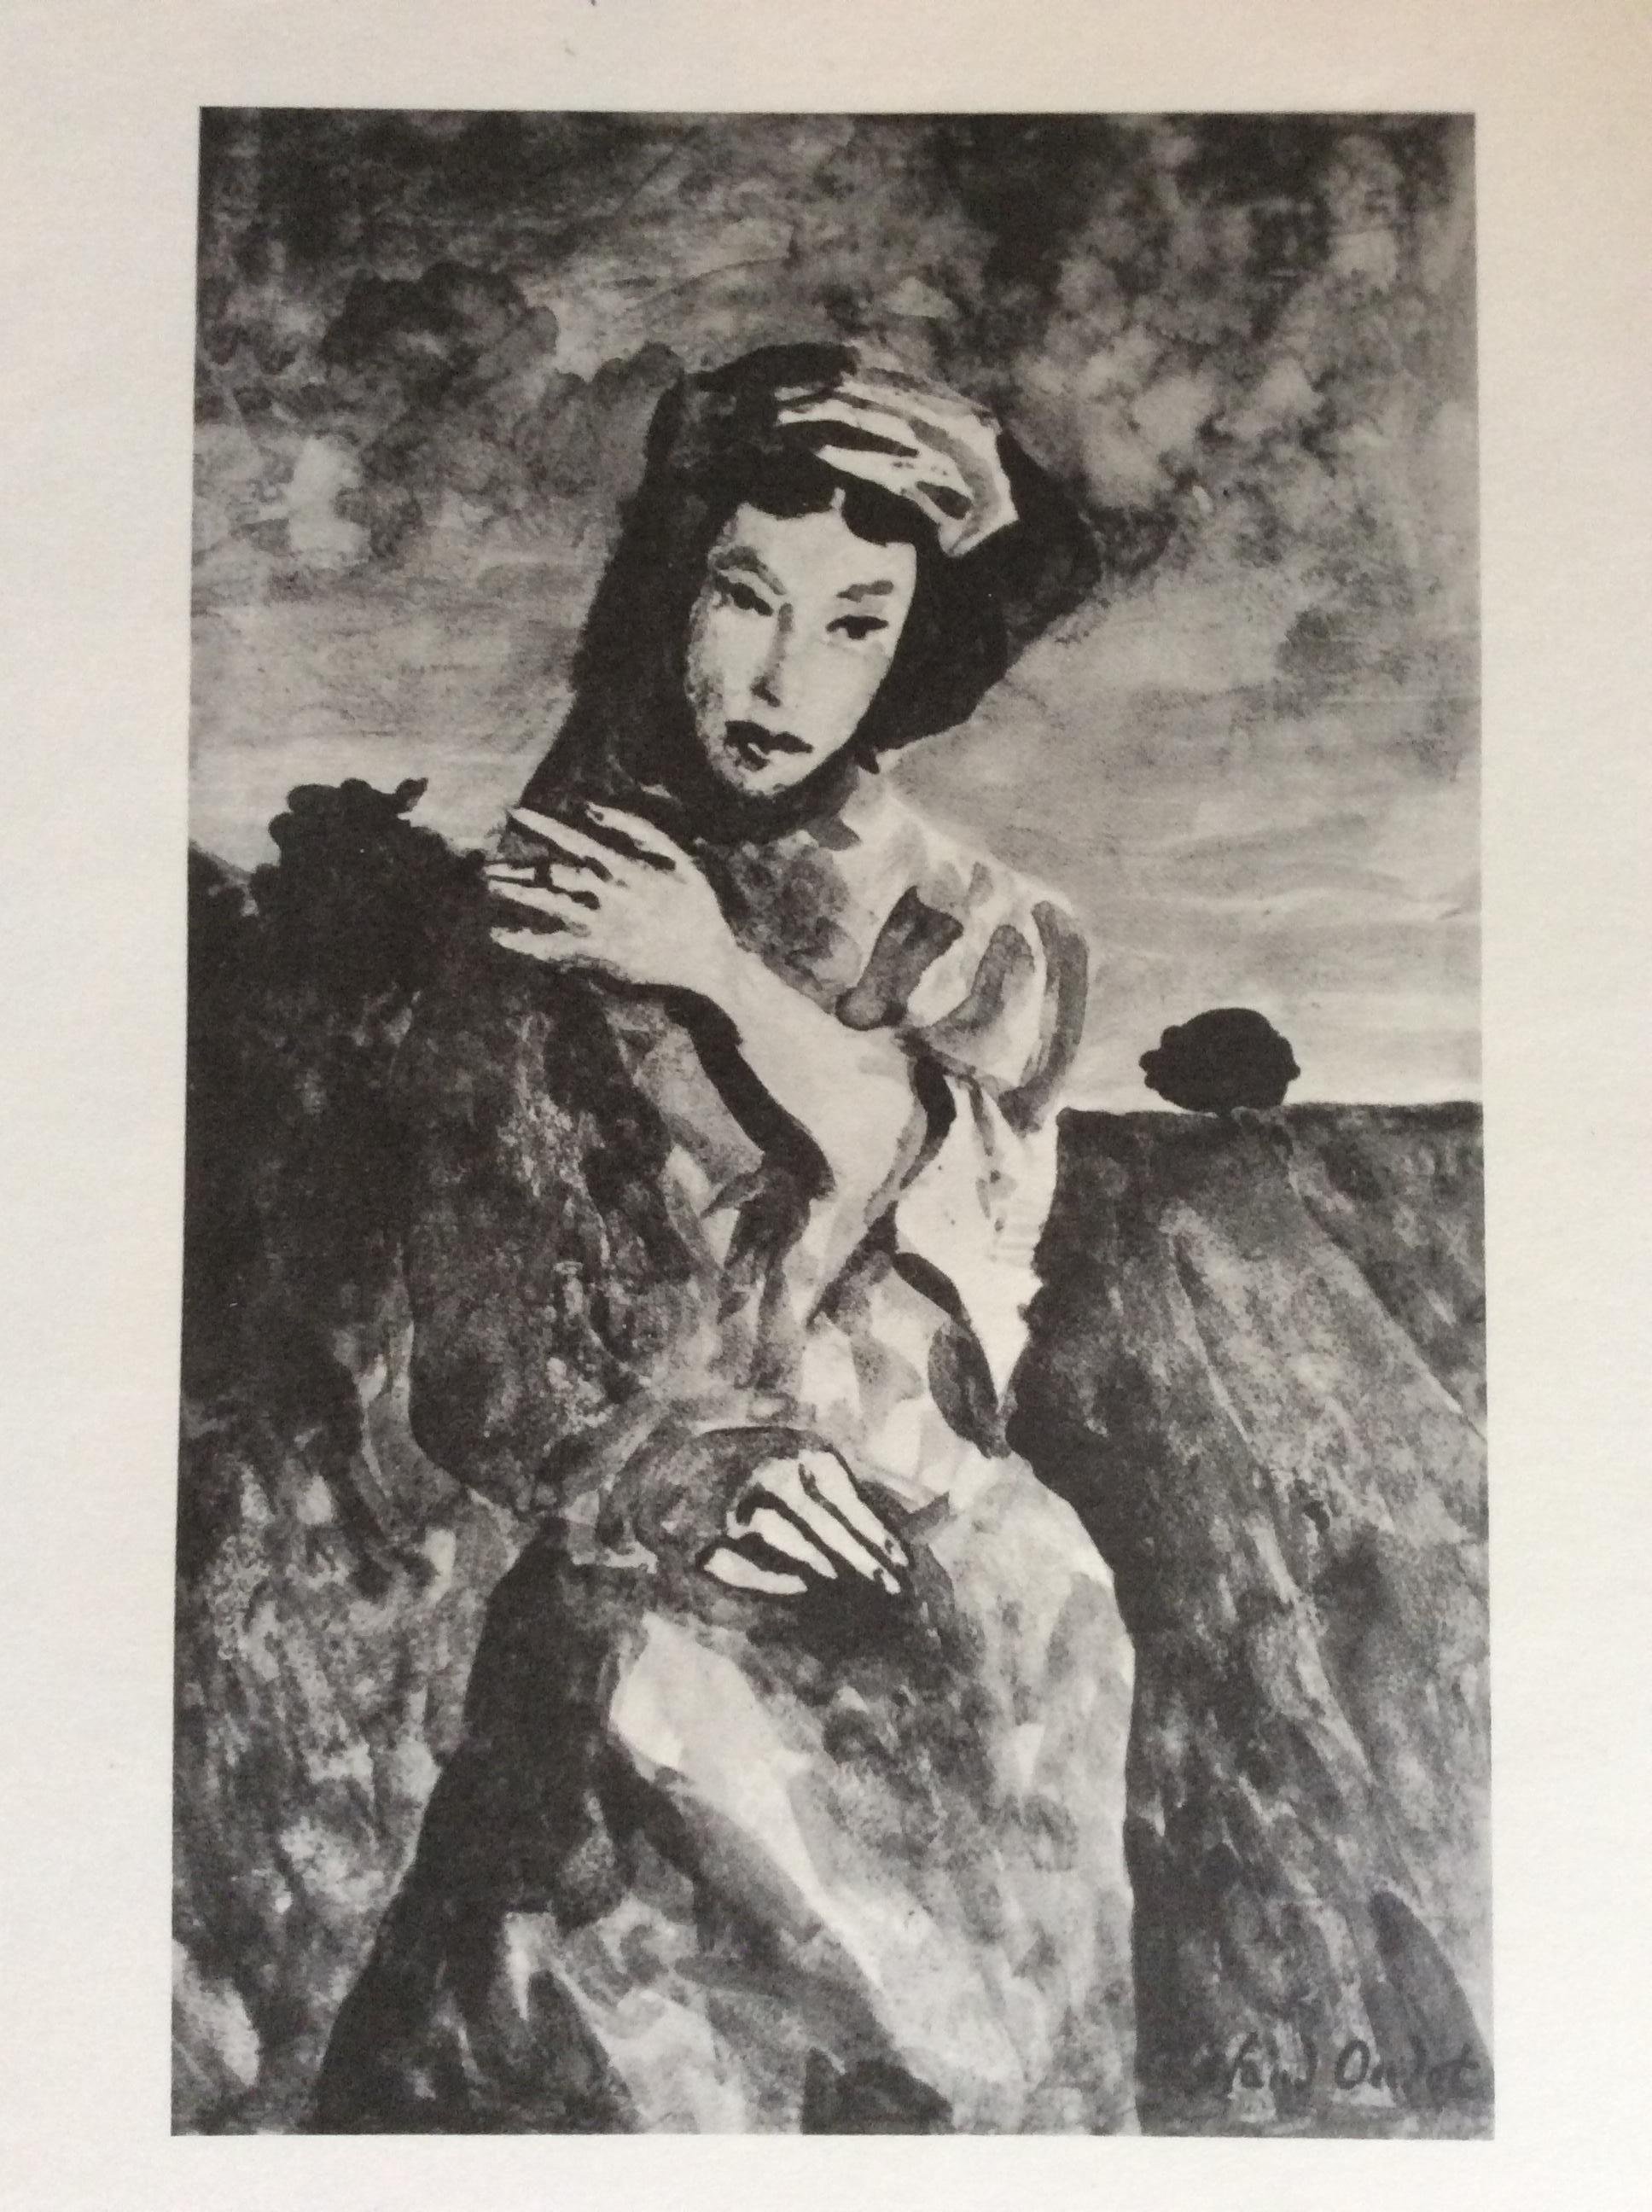 Original vintage poster from well-known gallery in the south of France.  Portrait Art by Roland Oublot.

Galerie de Francony was founded by Geoffroy de Francony to promote the works of emerging and established artists. A fascinating world which